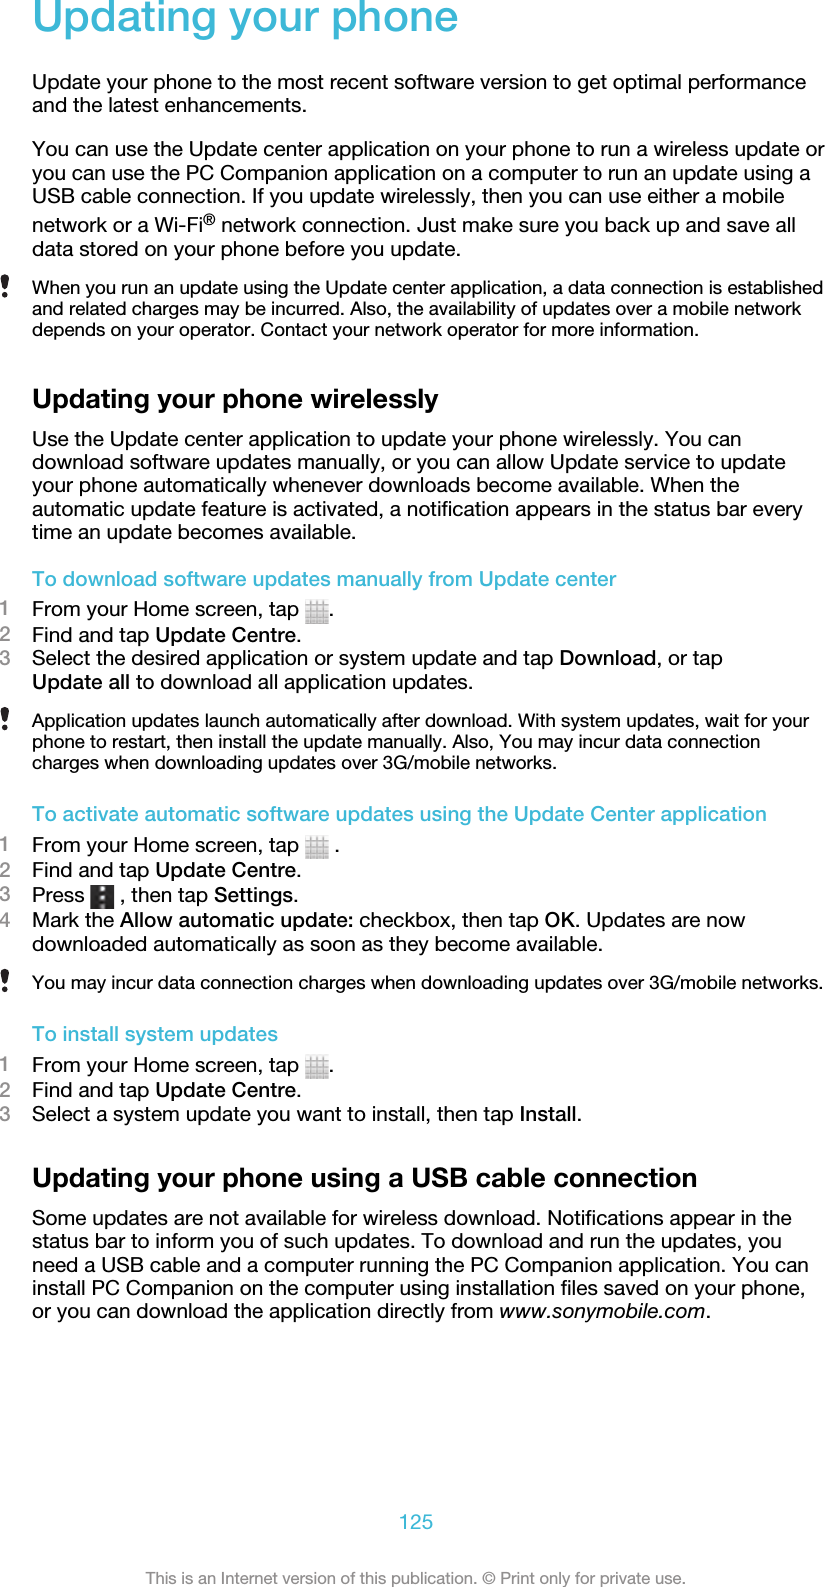 Updating your phoneUpdate your phone to the most recent software version to get optimal performanceand the latest enhancements.You can use the Update center application on your phone to run a wireless update oryou can use the PC Companion application on a computer to run an update using aUSB cable connection. If you update wirelessly, then you can use either a mobilenetwork or a Wi-Fi® network connection. Just make sure you back up and save alldata stored on your phone before you update.When you run an update using the Update center application, a data connection is establishedand related charges may be incurred. Also, the availability of updates over a mobile networkdepends on your operator. Contact your network operator for more information.Updating your phone wirelesslyUse the Update center application to update your phone wirelessly. You candownload software updates manually, or you can allow Update service to updateyour phone automatically whenever downloads become available. When theautomatic update feature is activated, a notification appears in the status bar everytime an update becomes available.To download software updates manually from Update center1From your Home screen, tap  .2Find and tap Update Centre.3Select the desired application or system update and tap Download, or tapUpdate all to download all application updates.Application updates launch automatically after download. With system updates, wait for yourphone to restart, then install the update manually. Also, You may incur data connectioncharges when downloading updates over 3G/mobile networks.To activate automatic software updates using the Update Center application1From your Home screen, tap   .2Find and tap Update Centre.3Press   , then tap Settings.4Mark the Allow automatic update: checkbox, then tap OK. Updates are nowdownloaded automatically as soon as they become available.You may incur data connection charges when downloading updates over 3G/mobile networks.To install system updates1From your Home screen, tap  .2Find and tap Update Centre.3Select a system update you want to install, then tap Install.Updating your phone using a USB cable connectionSome updates are not available for wireless download. Notifications appear in thestatus bar to inform you of such updates. To download and run the updates, youneed a USB cable and a computer running the PC Companion application. You caninstall PC Companion on the computer using installation files saved on your phone,or you can download the application directly from www.sonymobile.com.125This is an Internet version of this publication. © Print only for private use.